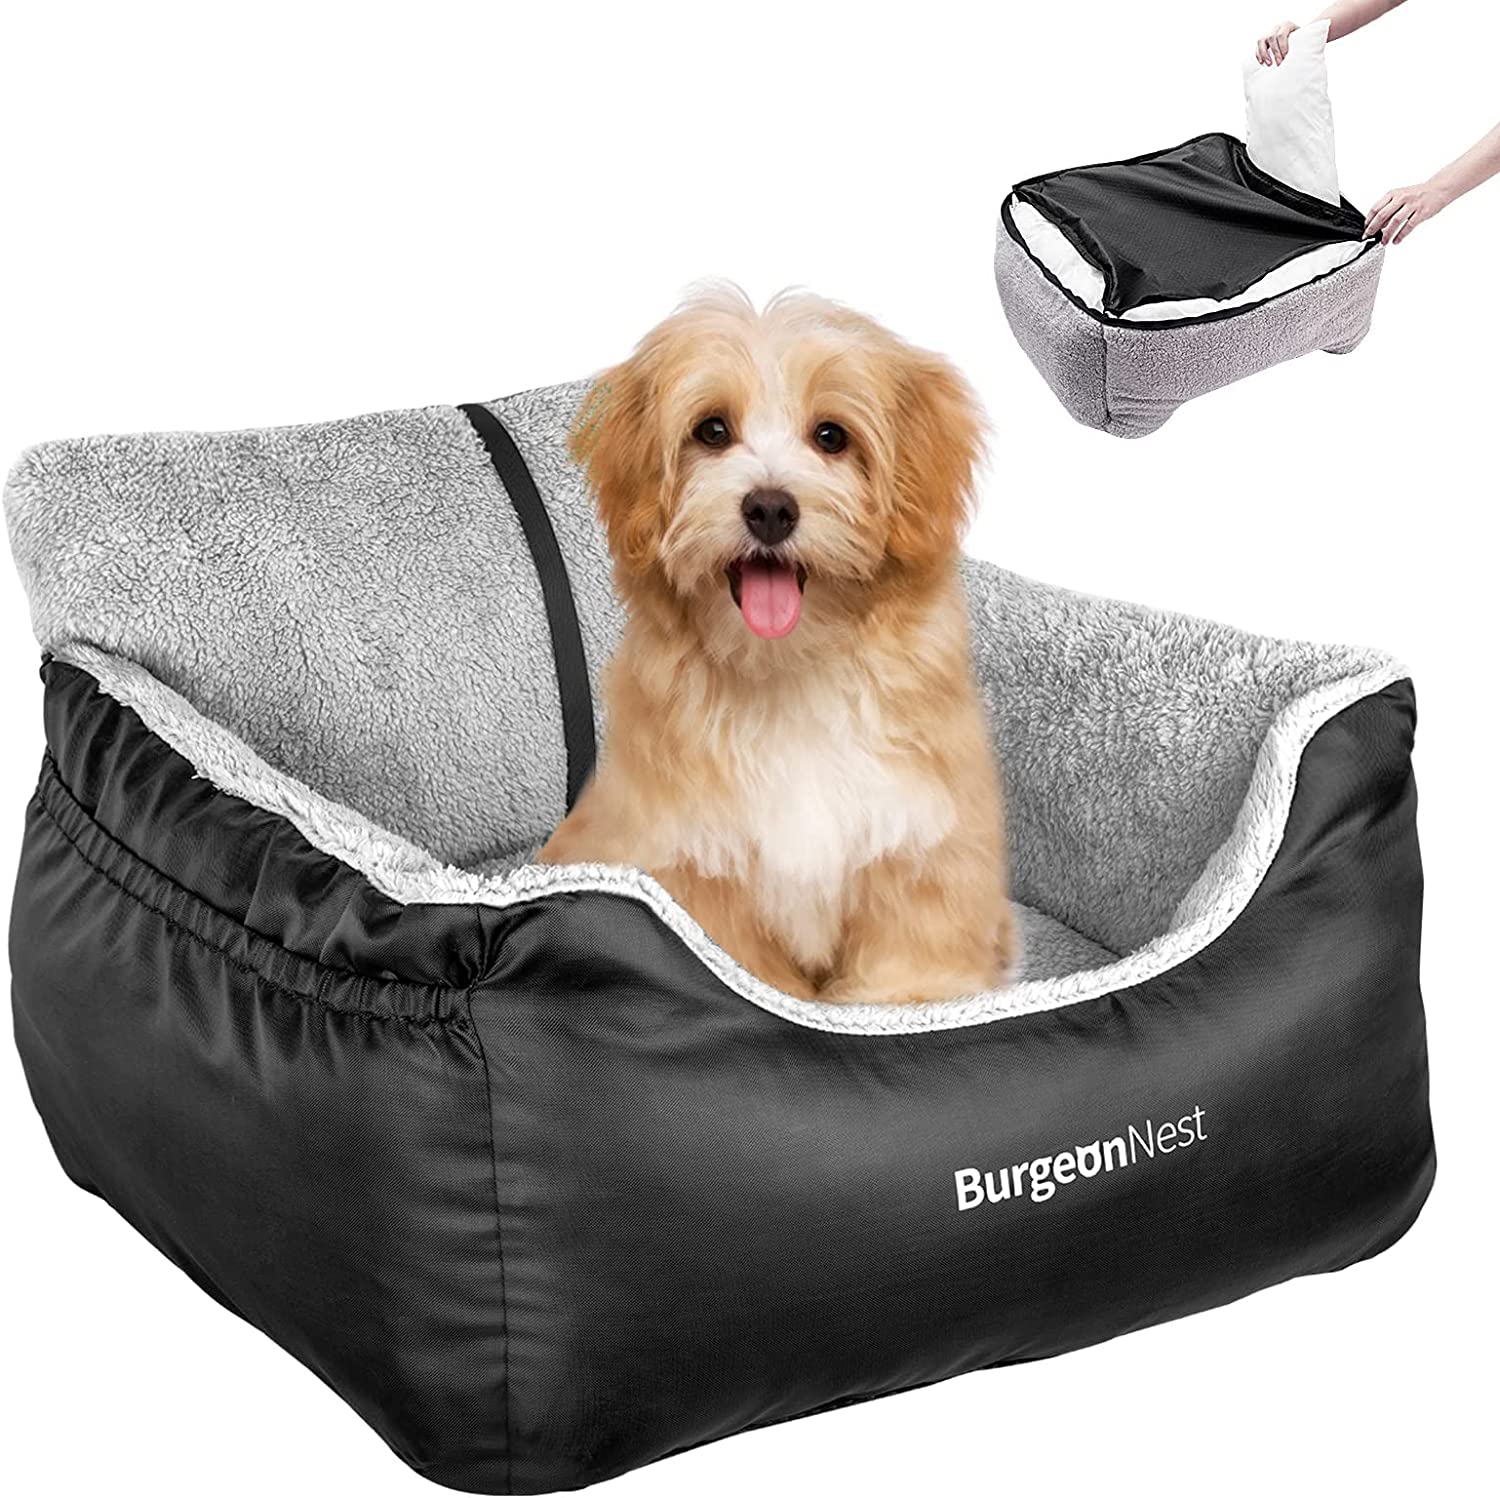 BurgeonNest Dog Car Seat for Small Dogs, Fully Detachable and Washable Dog Carseats Small Under 25, Soft Dog Booster Seats with Storage Pockets 